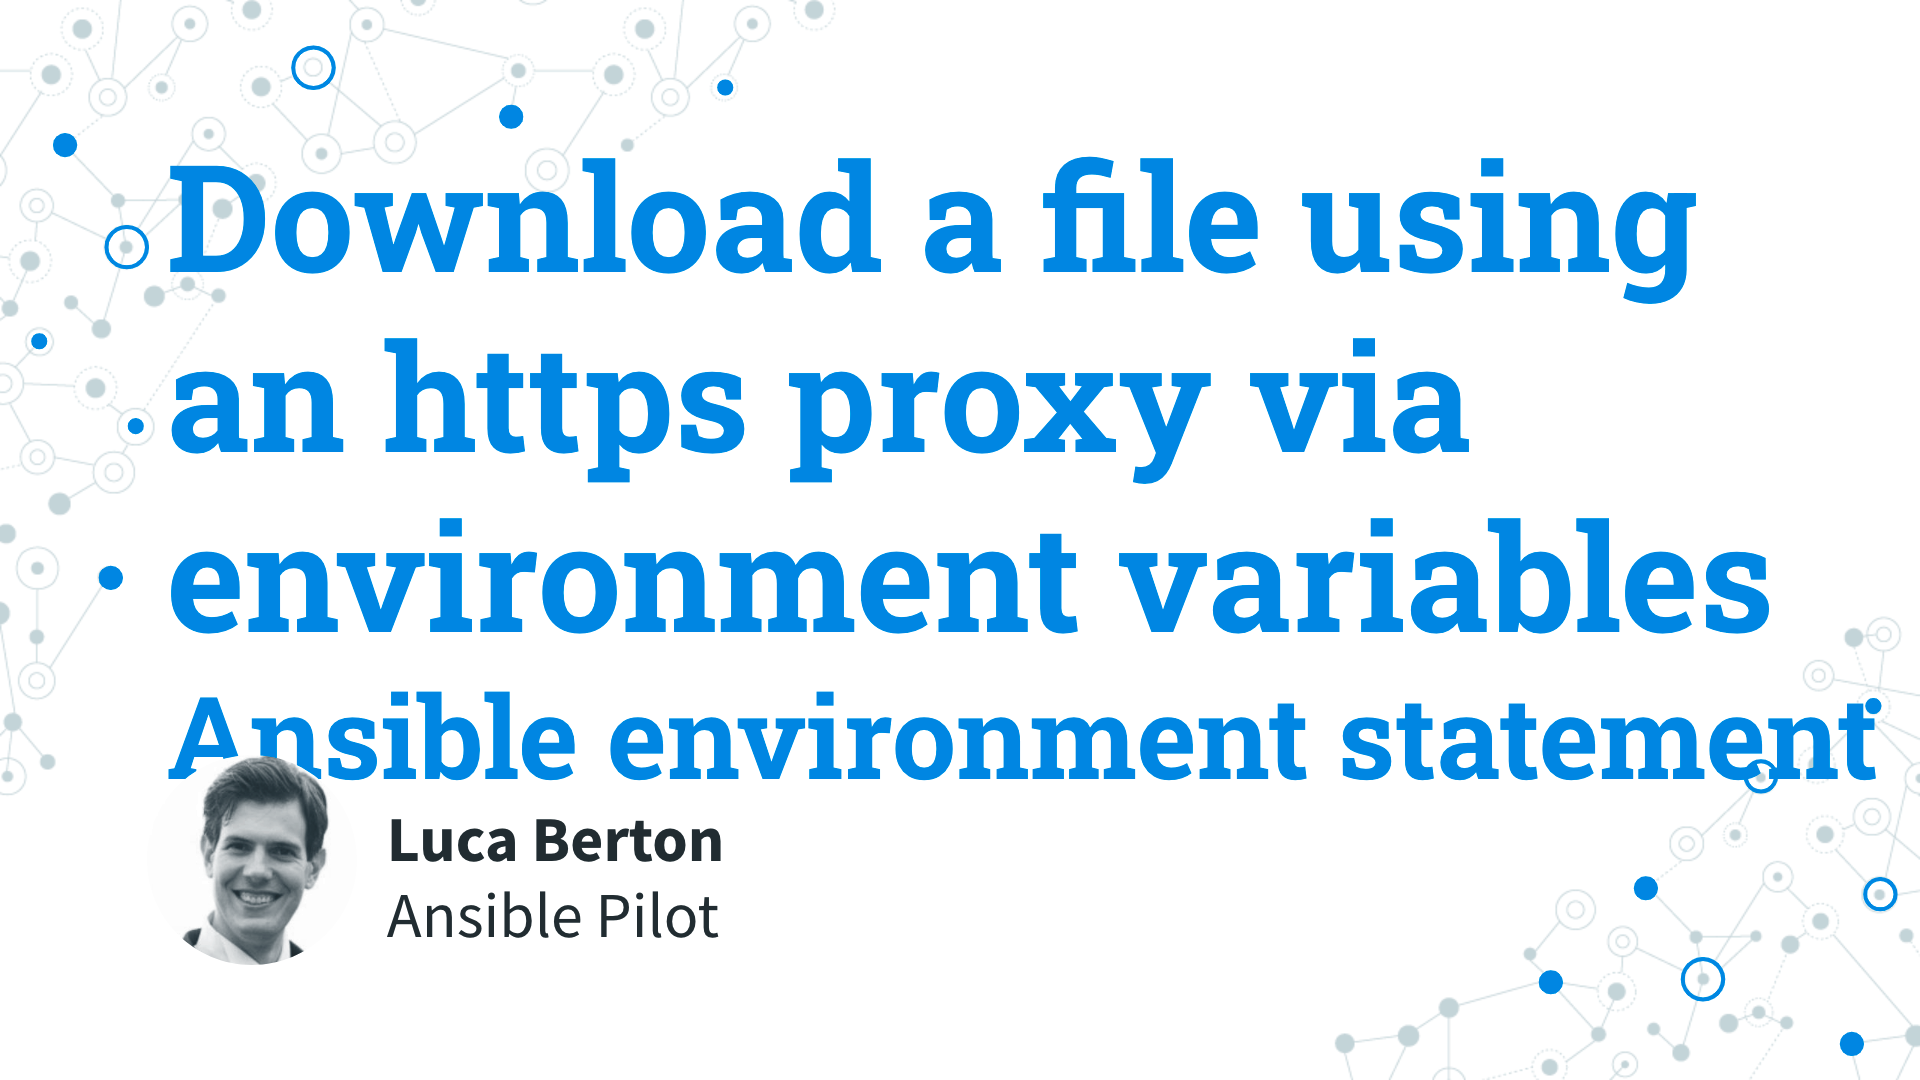 Download a file using an HTTPS proxy via environment variables - Ansible get_url and environment